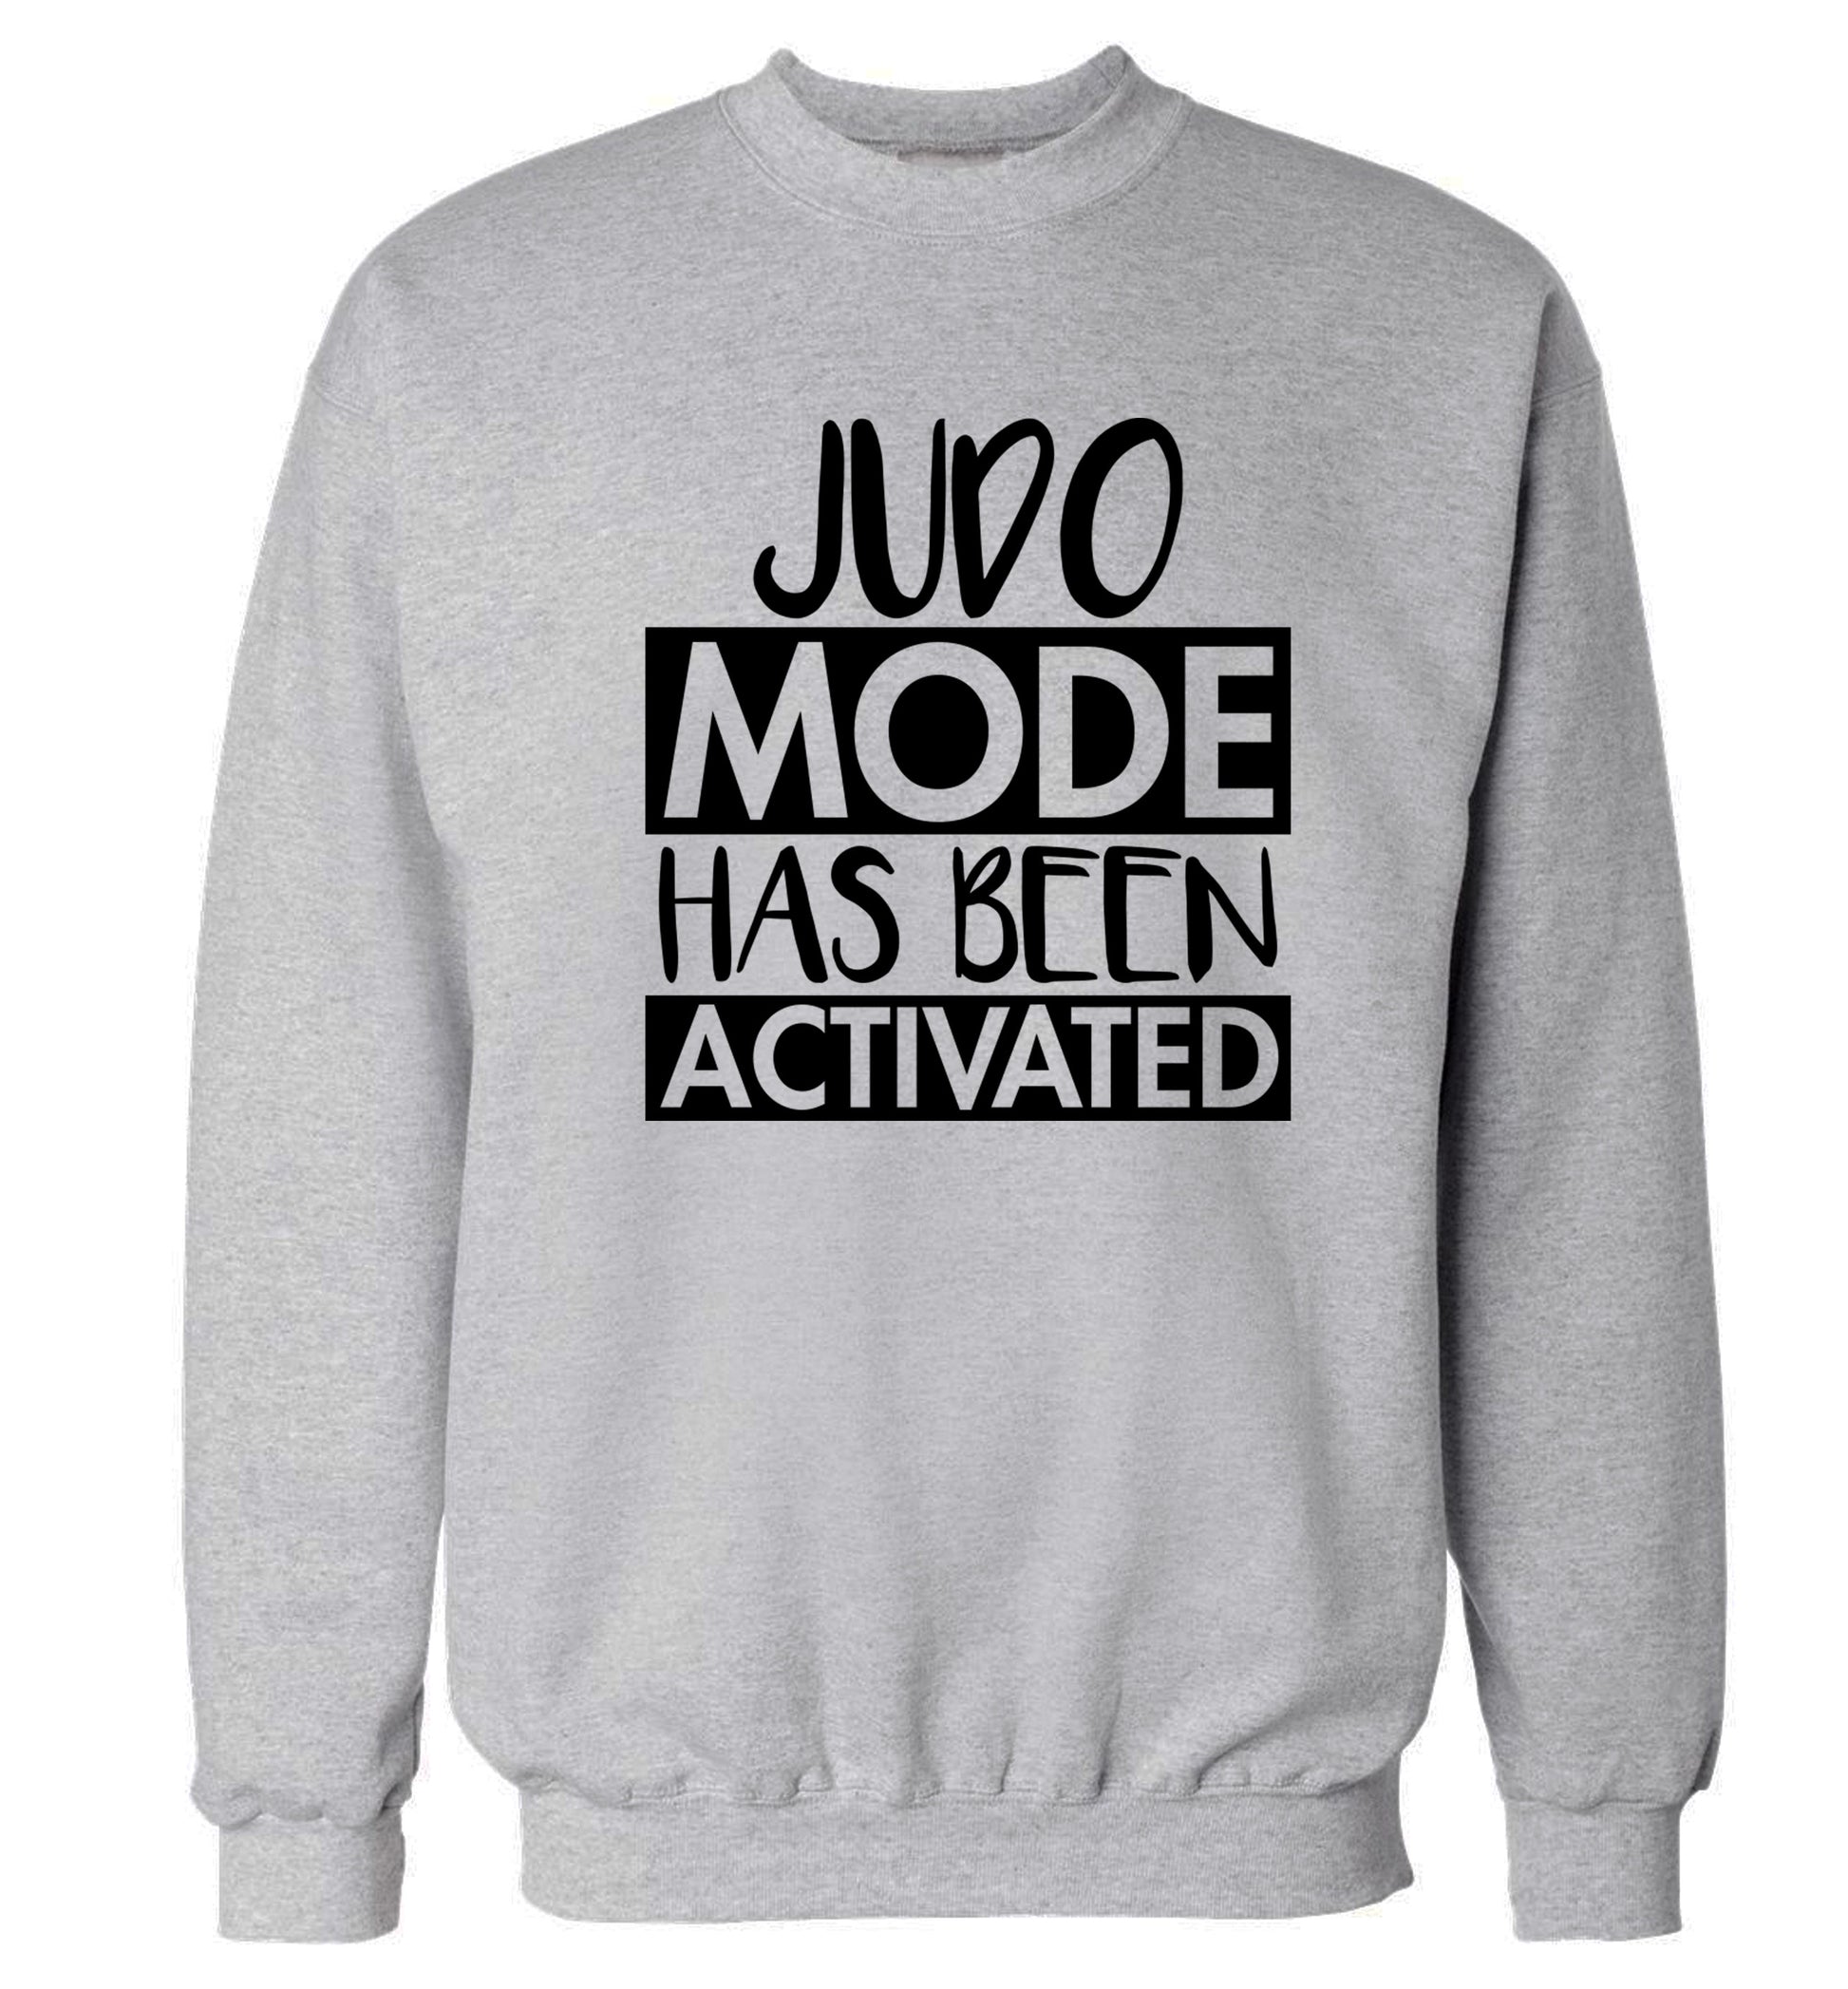 Judo mode activated Adult's unisex grey Sweater 2XL